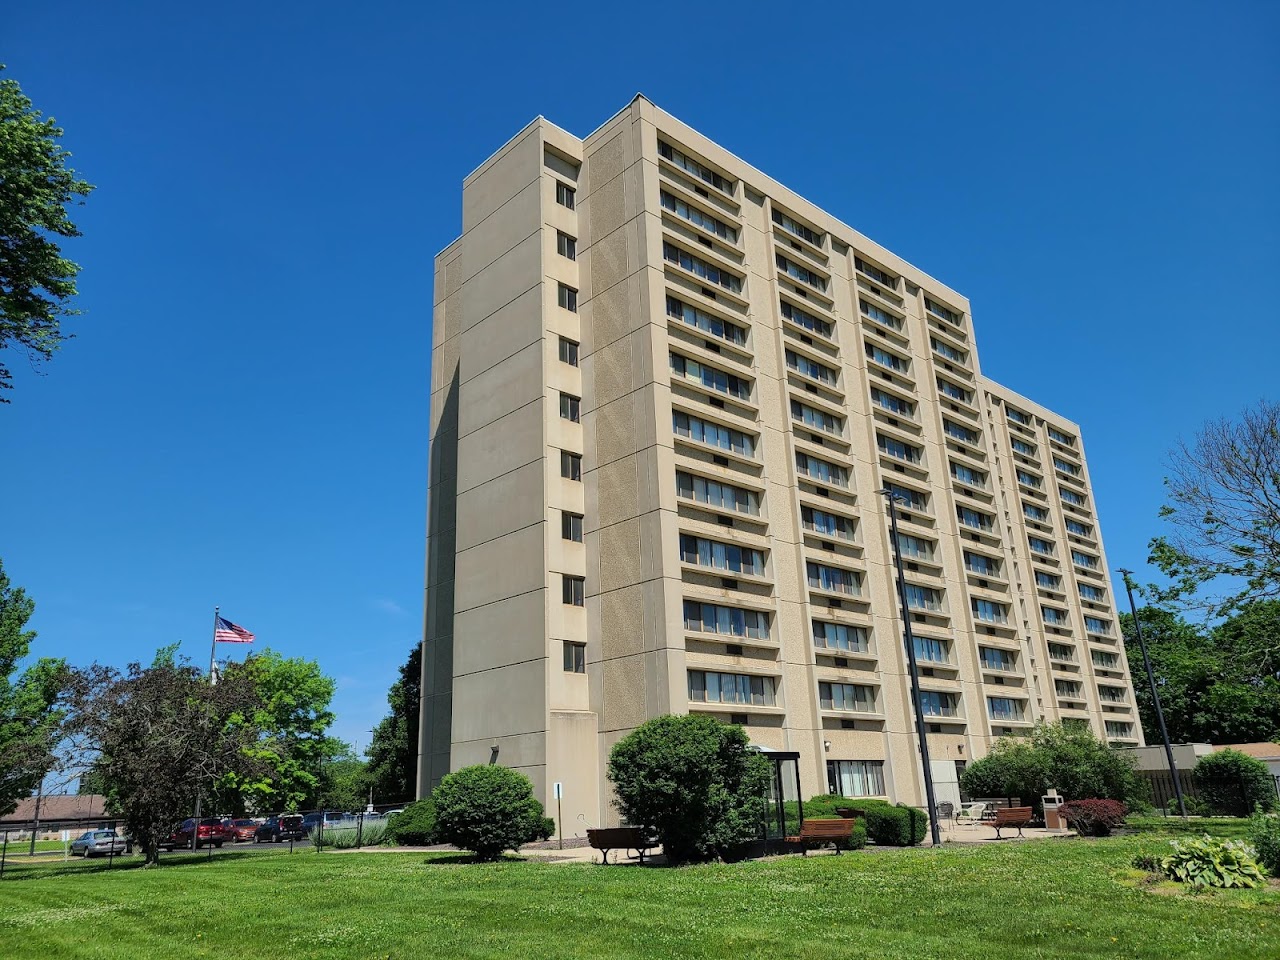 Photo of CAPITOL PLAZA. Affordable housing located at 1210 E WASHINGTON ST SPRINGFIELD, IL 62703